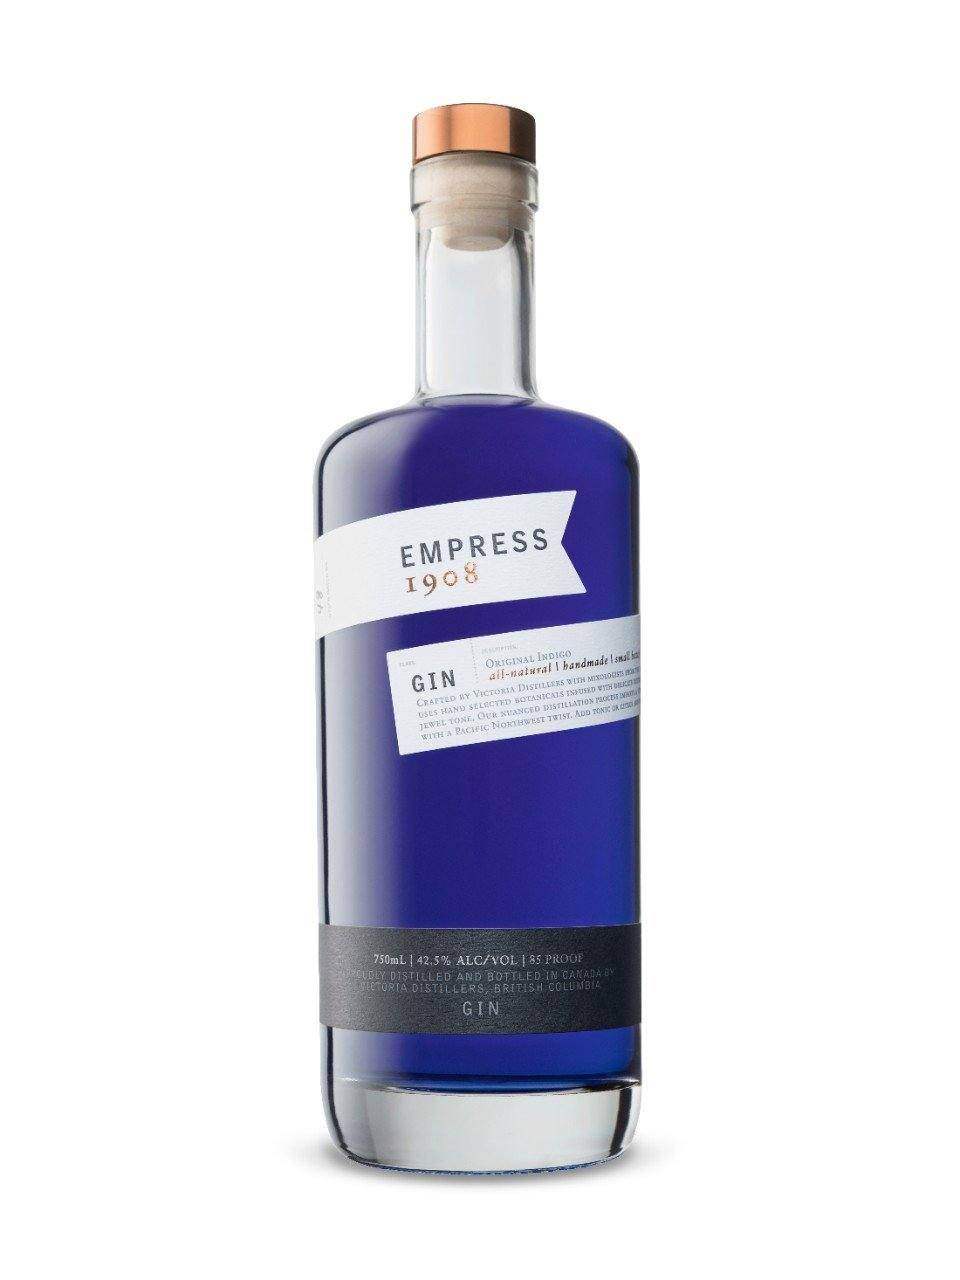 Empress 1908 Gin | Exquisite Wine & Alcohol Gift Delivery Toronto Canada | Vyno